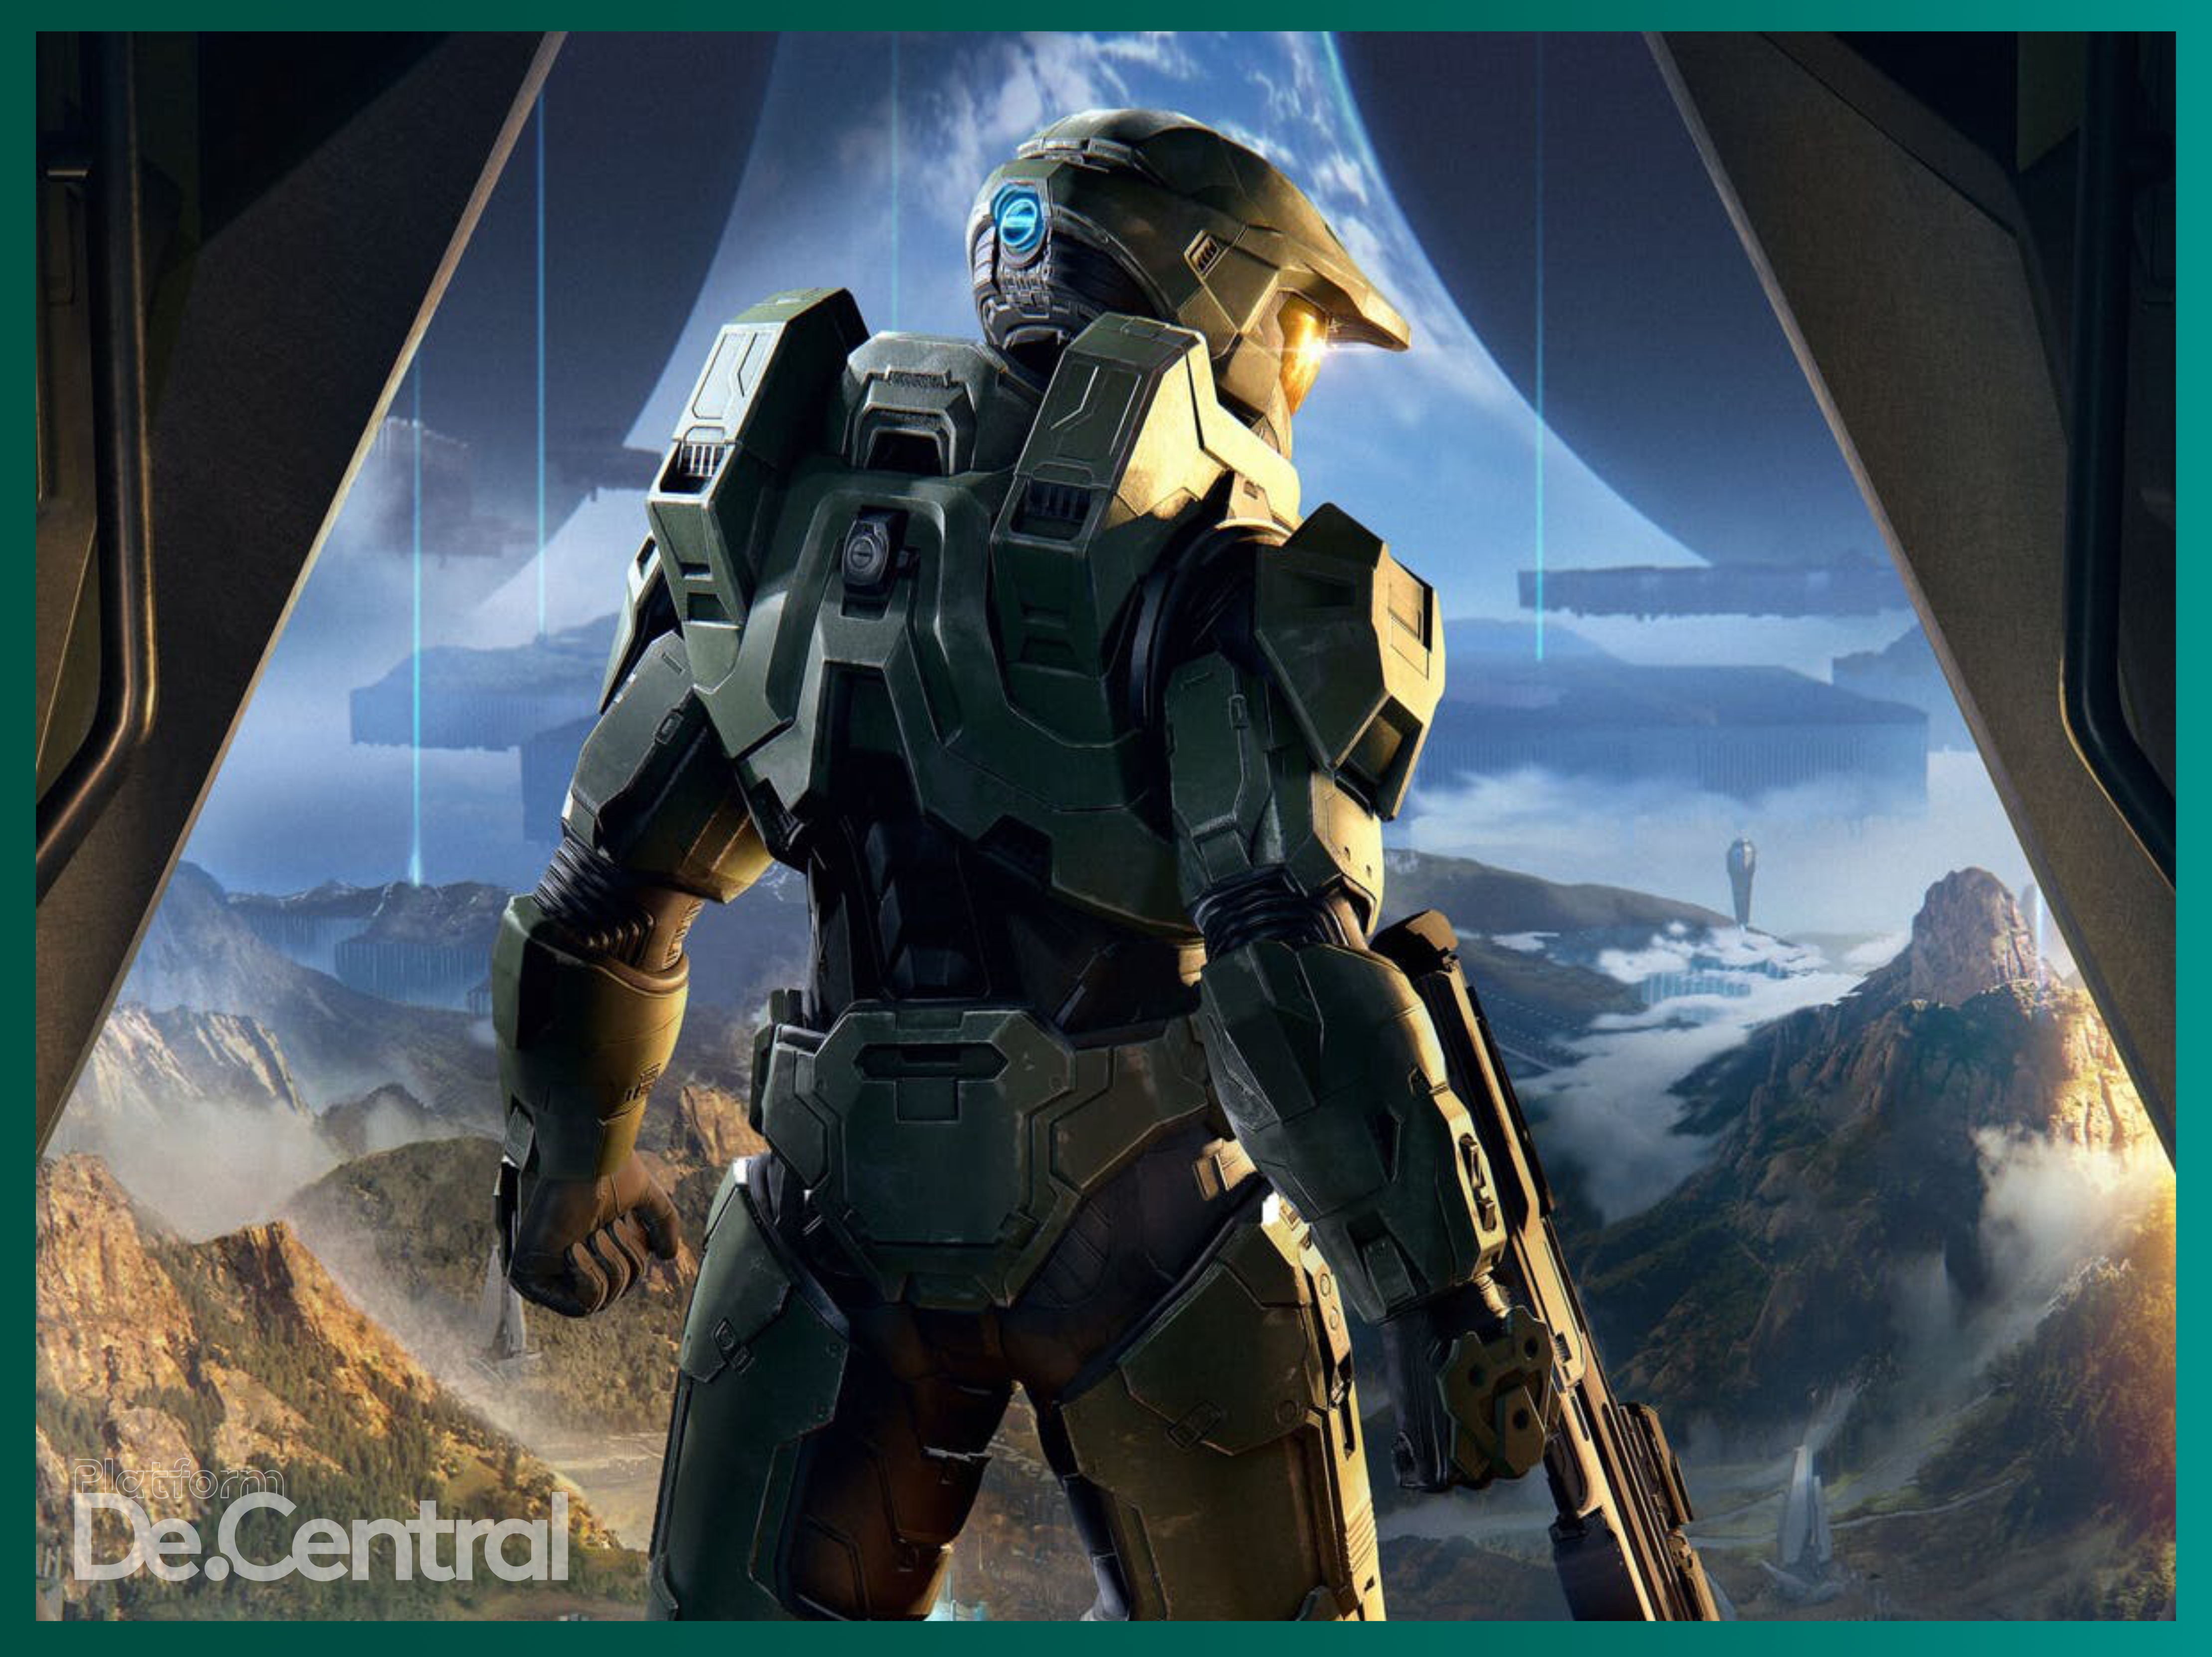 Microsoft announces games showcase, will  show Halo Infinite gameplay, Get the details here